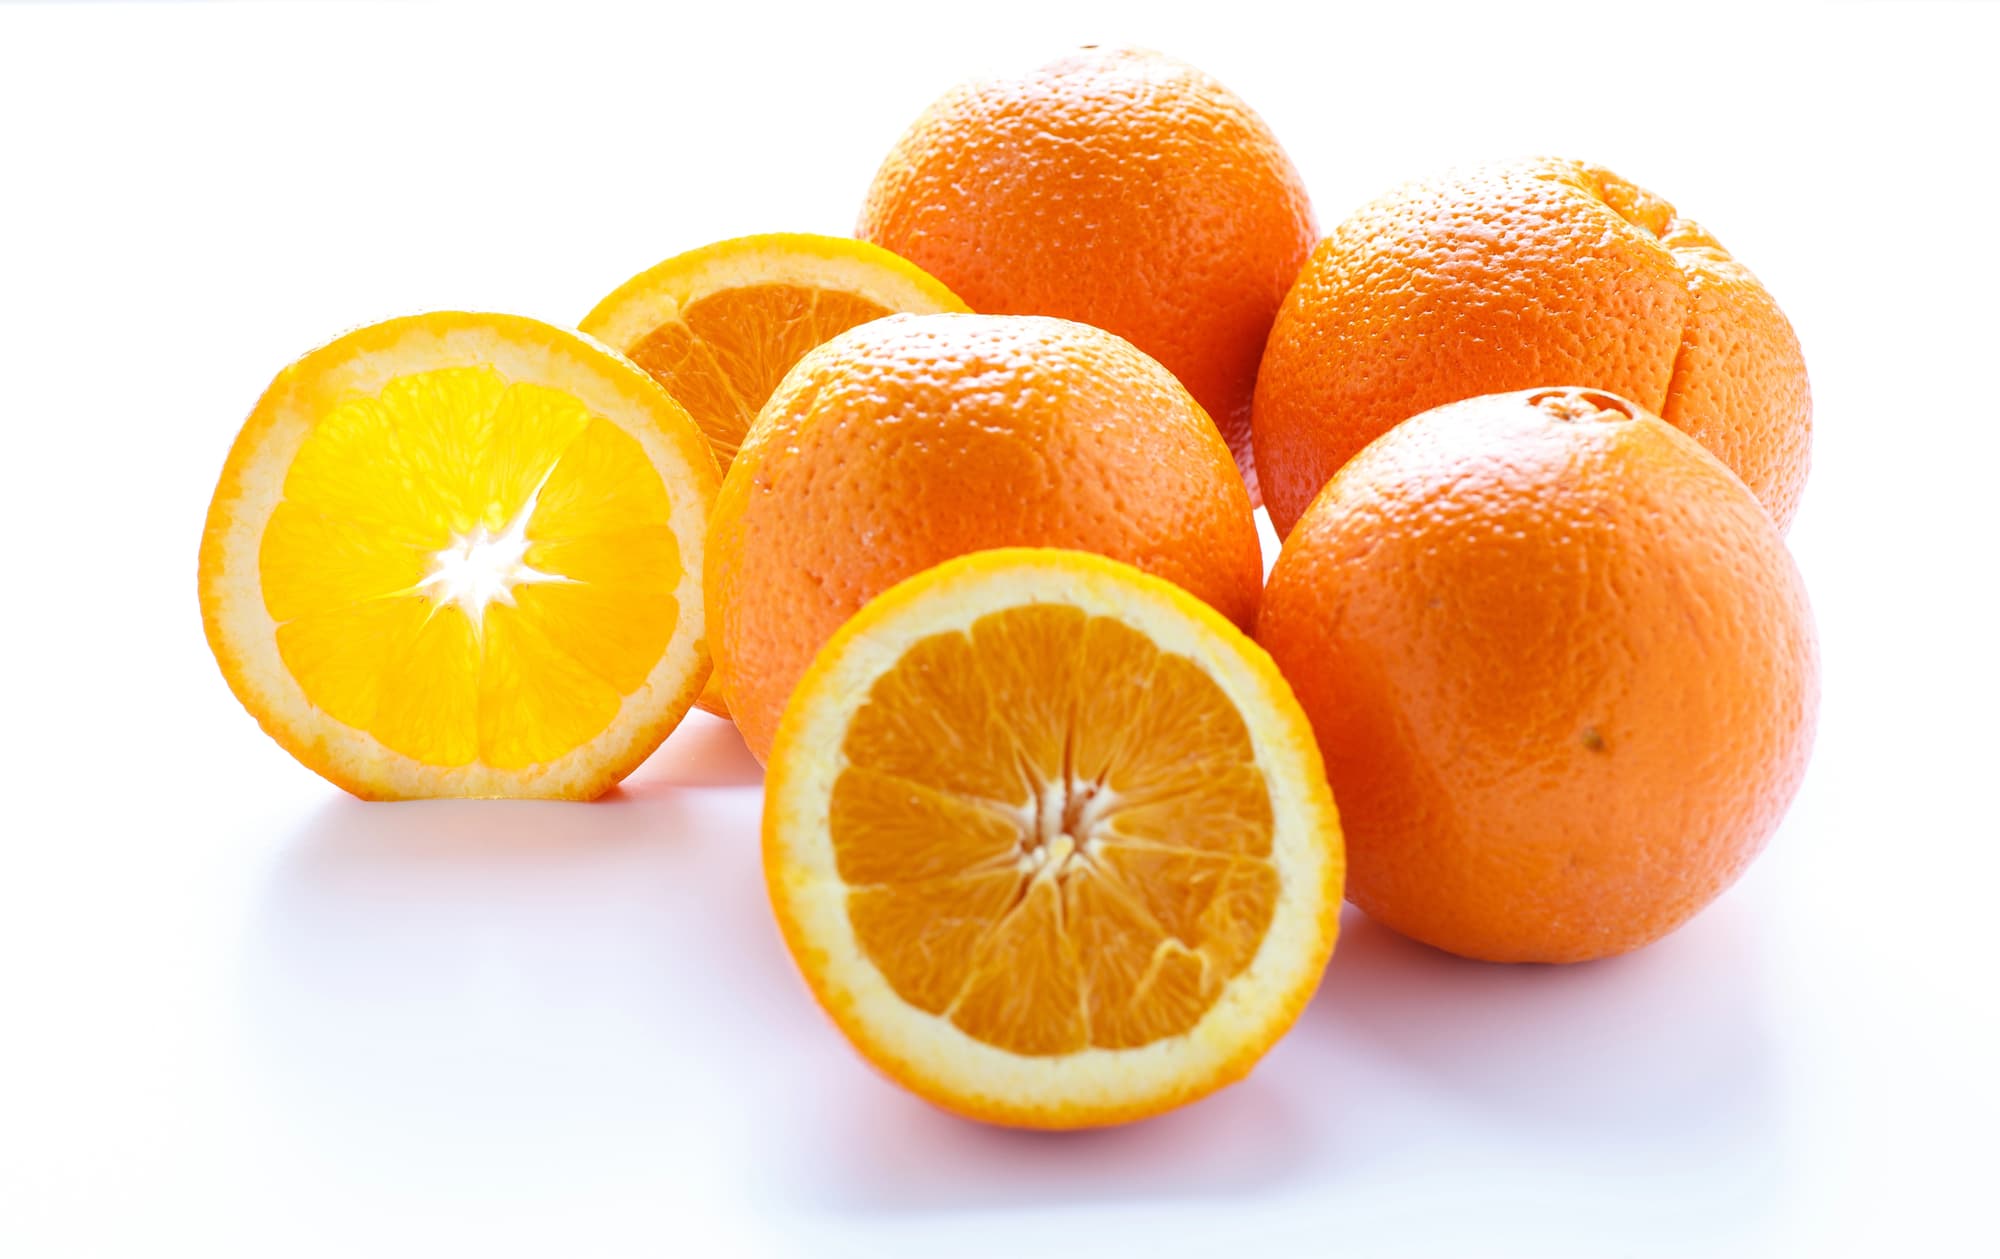 A bunch of nutritious oranges on a white surface.